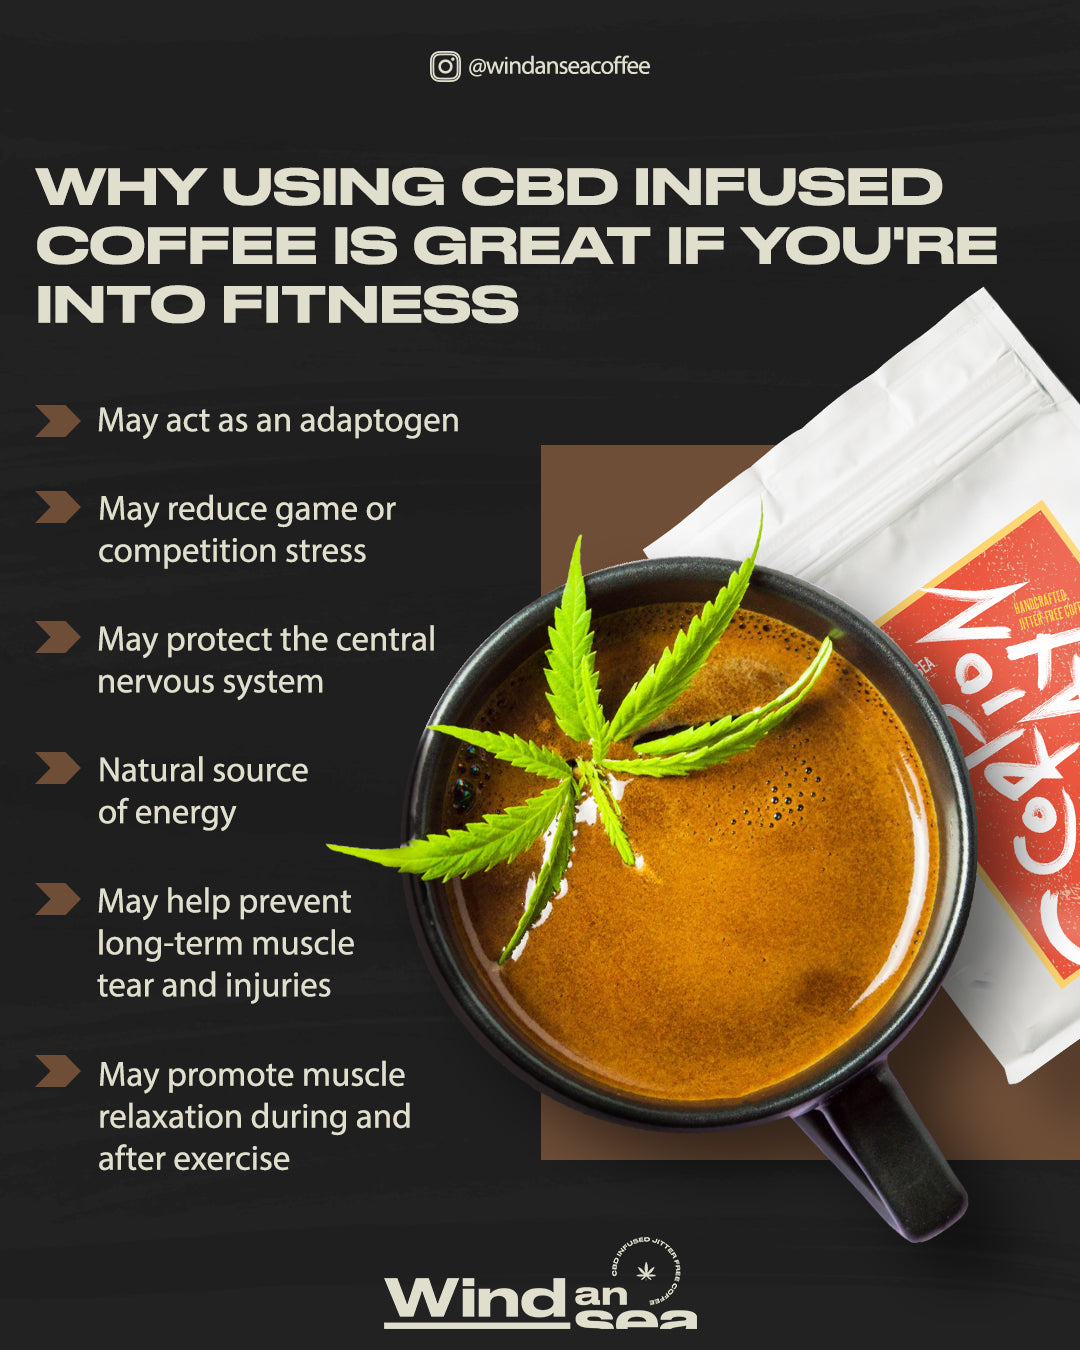 http://windanseacoffee.com/cdn/shop/articles/Why_Using_CBD_Infused_Coffee_is_Great_If_You_re_Into_Fitness_copy.jpg?v=1684356166